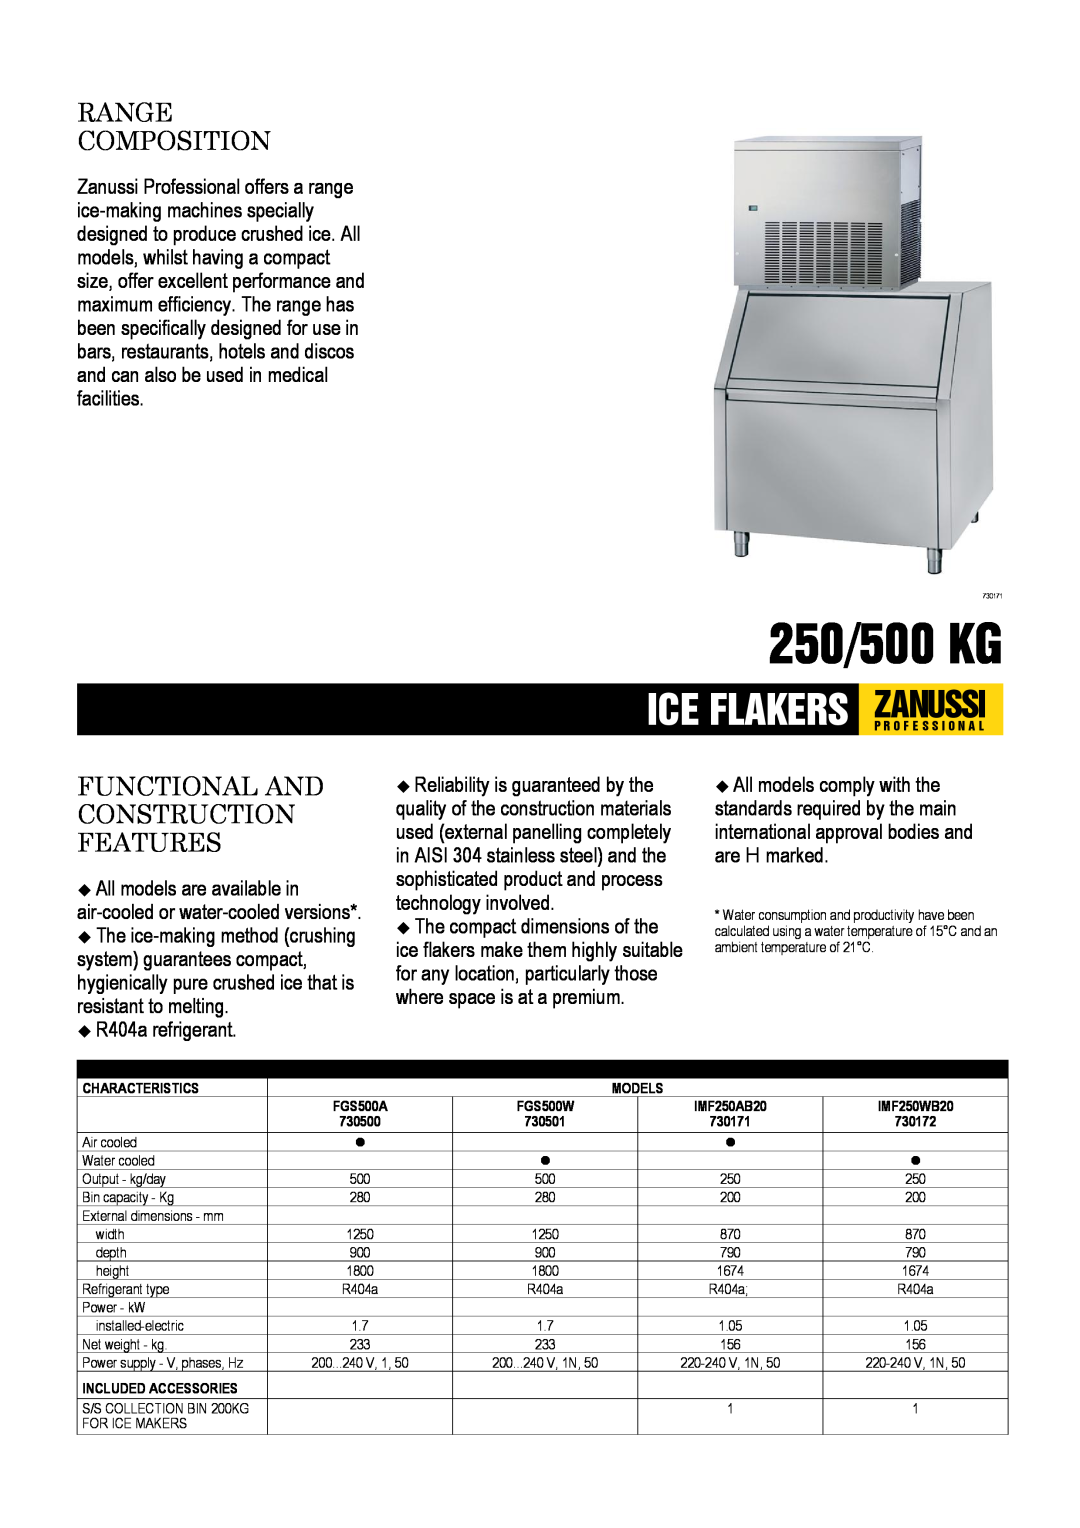 Zanussi IMF250AB20, IMF250WB20, FGS500A dimensions 250/500 KG, Range Composition, Functional And Construction Features 